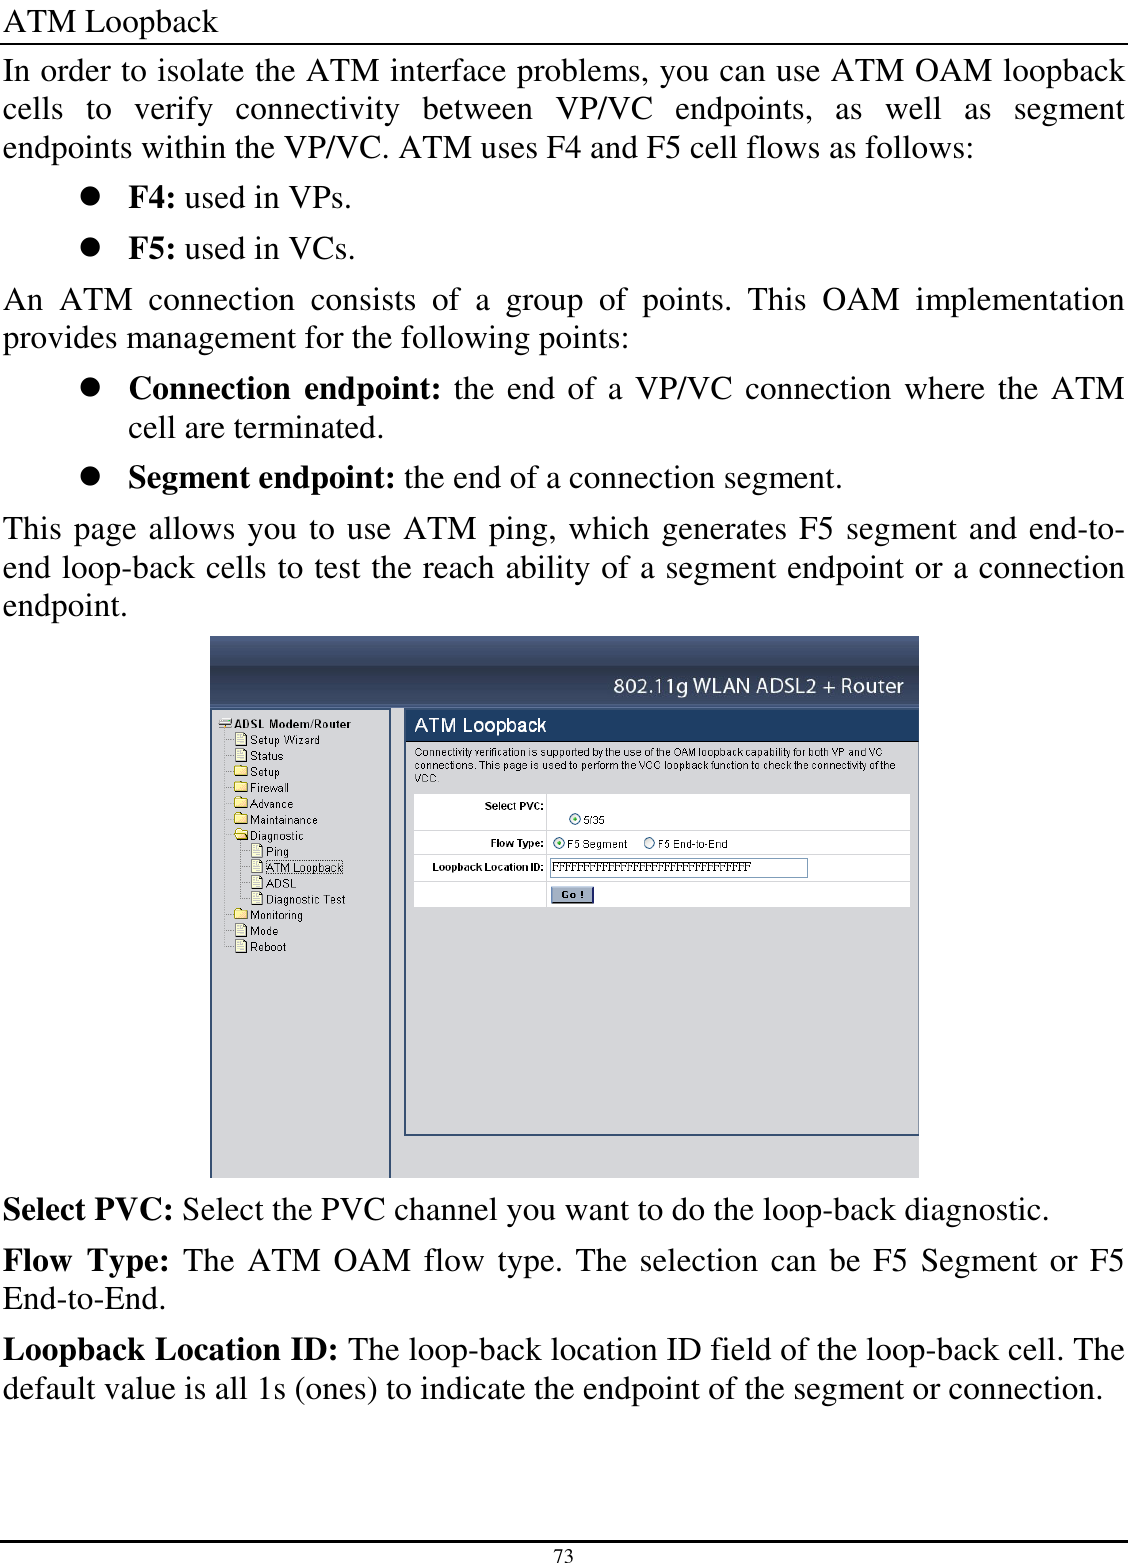 73 ATM Loopback In order to isolate the ATM interface problems, you can use ATM OAM loopback cells  to  verify  connectivity  between  VP/VC  endpoints,  as  well  as  segment endpoints within the VP/VC. ATM uses F4 and F5 cell flows as follows:  F4: used in VPs.  F5: used in VCs. An  ATM  connection  consists  of  a  group  of  points.  This  OAM  implementation provides management for the following points:  Connection endpoint: the end of a VP/VC connection where the ATM cell are terminated.  Segment endpoint: the end of a connection segment. This page allows you to use ATM ping, which generates F5 segment and end-to-end loop-back cells to test the reach ability of a segment endpoint or a connection endpoint.  Select PVC: Select the PVC channel you want to do the loop-back diagnostic. Flow Type: The ATM OAM flow type. The selection can be F5 Segment or F5 End-to-End. Loopback Location ID: The loop-back location ID field of the loop-back cell. The default value is all 1s (ones) to indicate the endpoint of the segment or connection. 